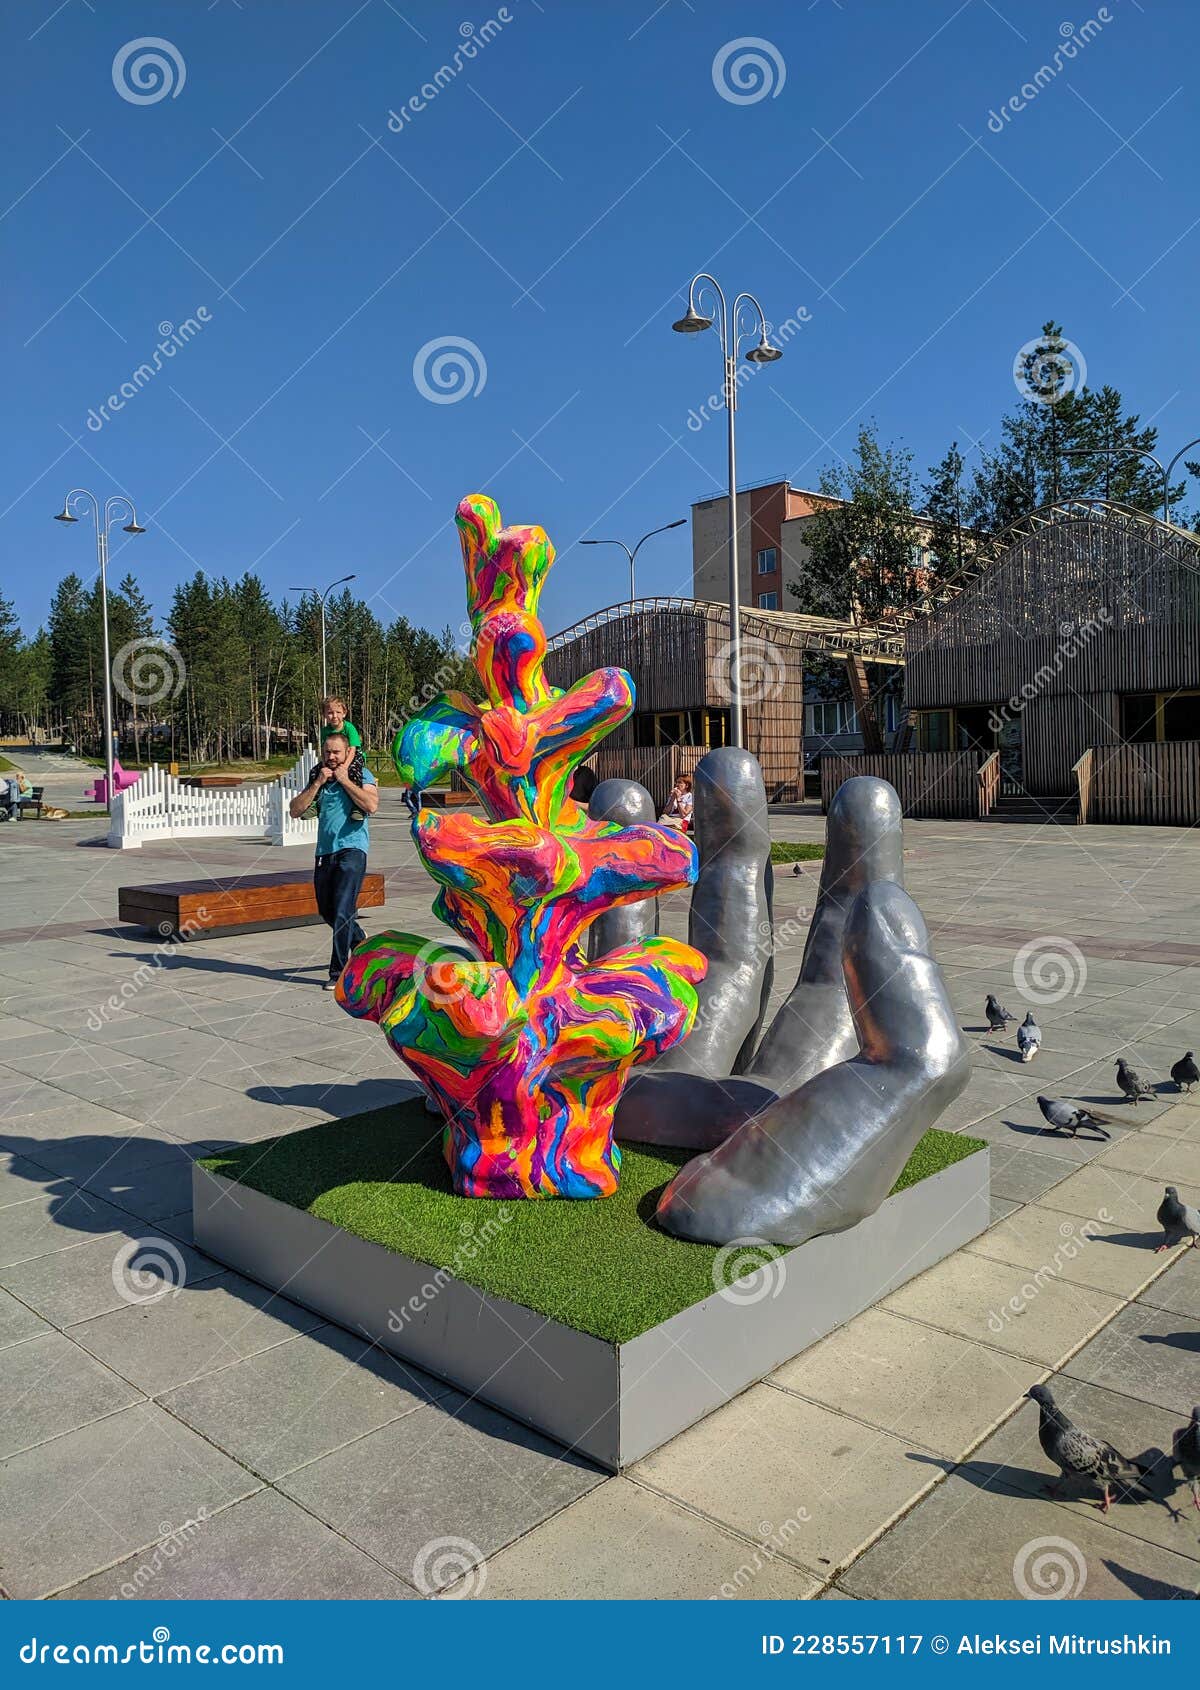 Noyabrsk, Russia - May 30, 2020: City Square For Recreation. People Sit